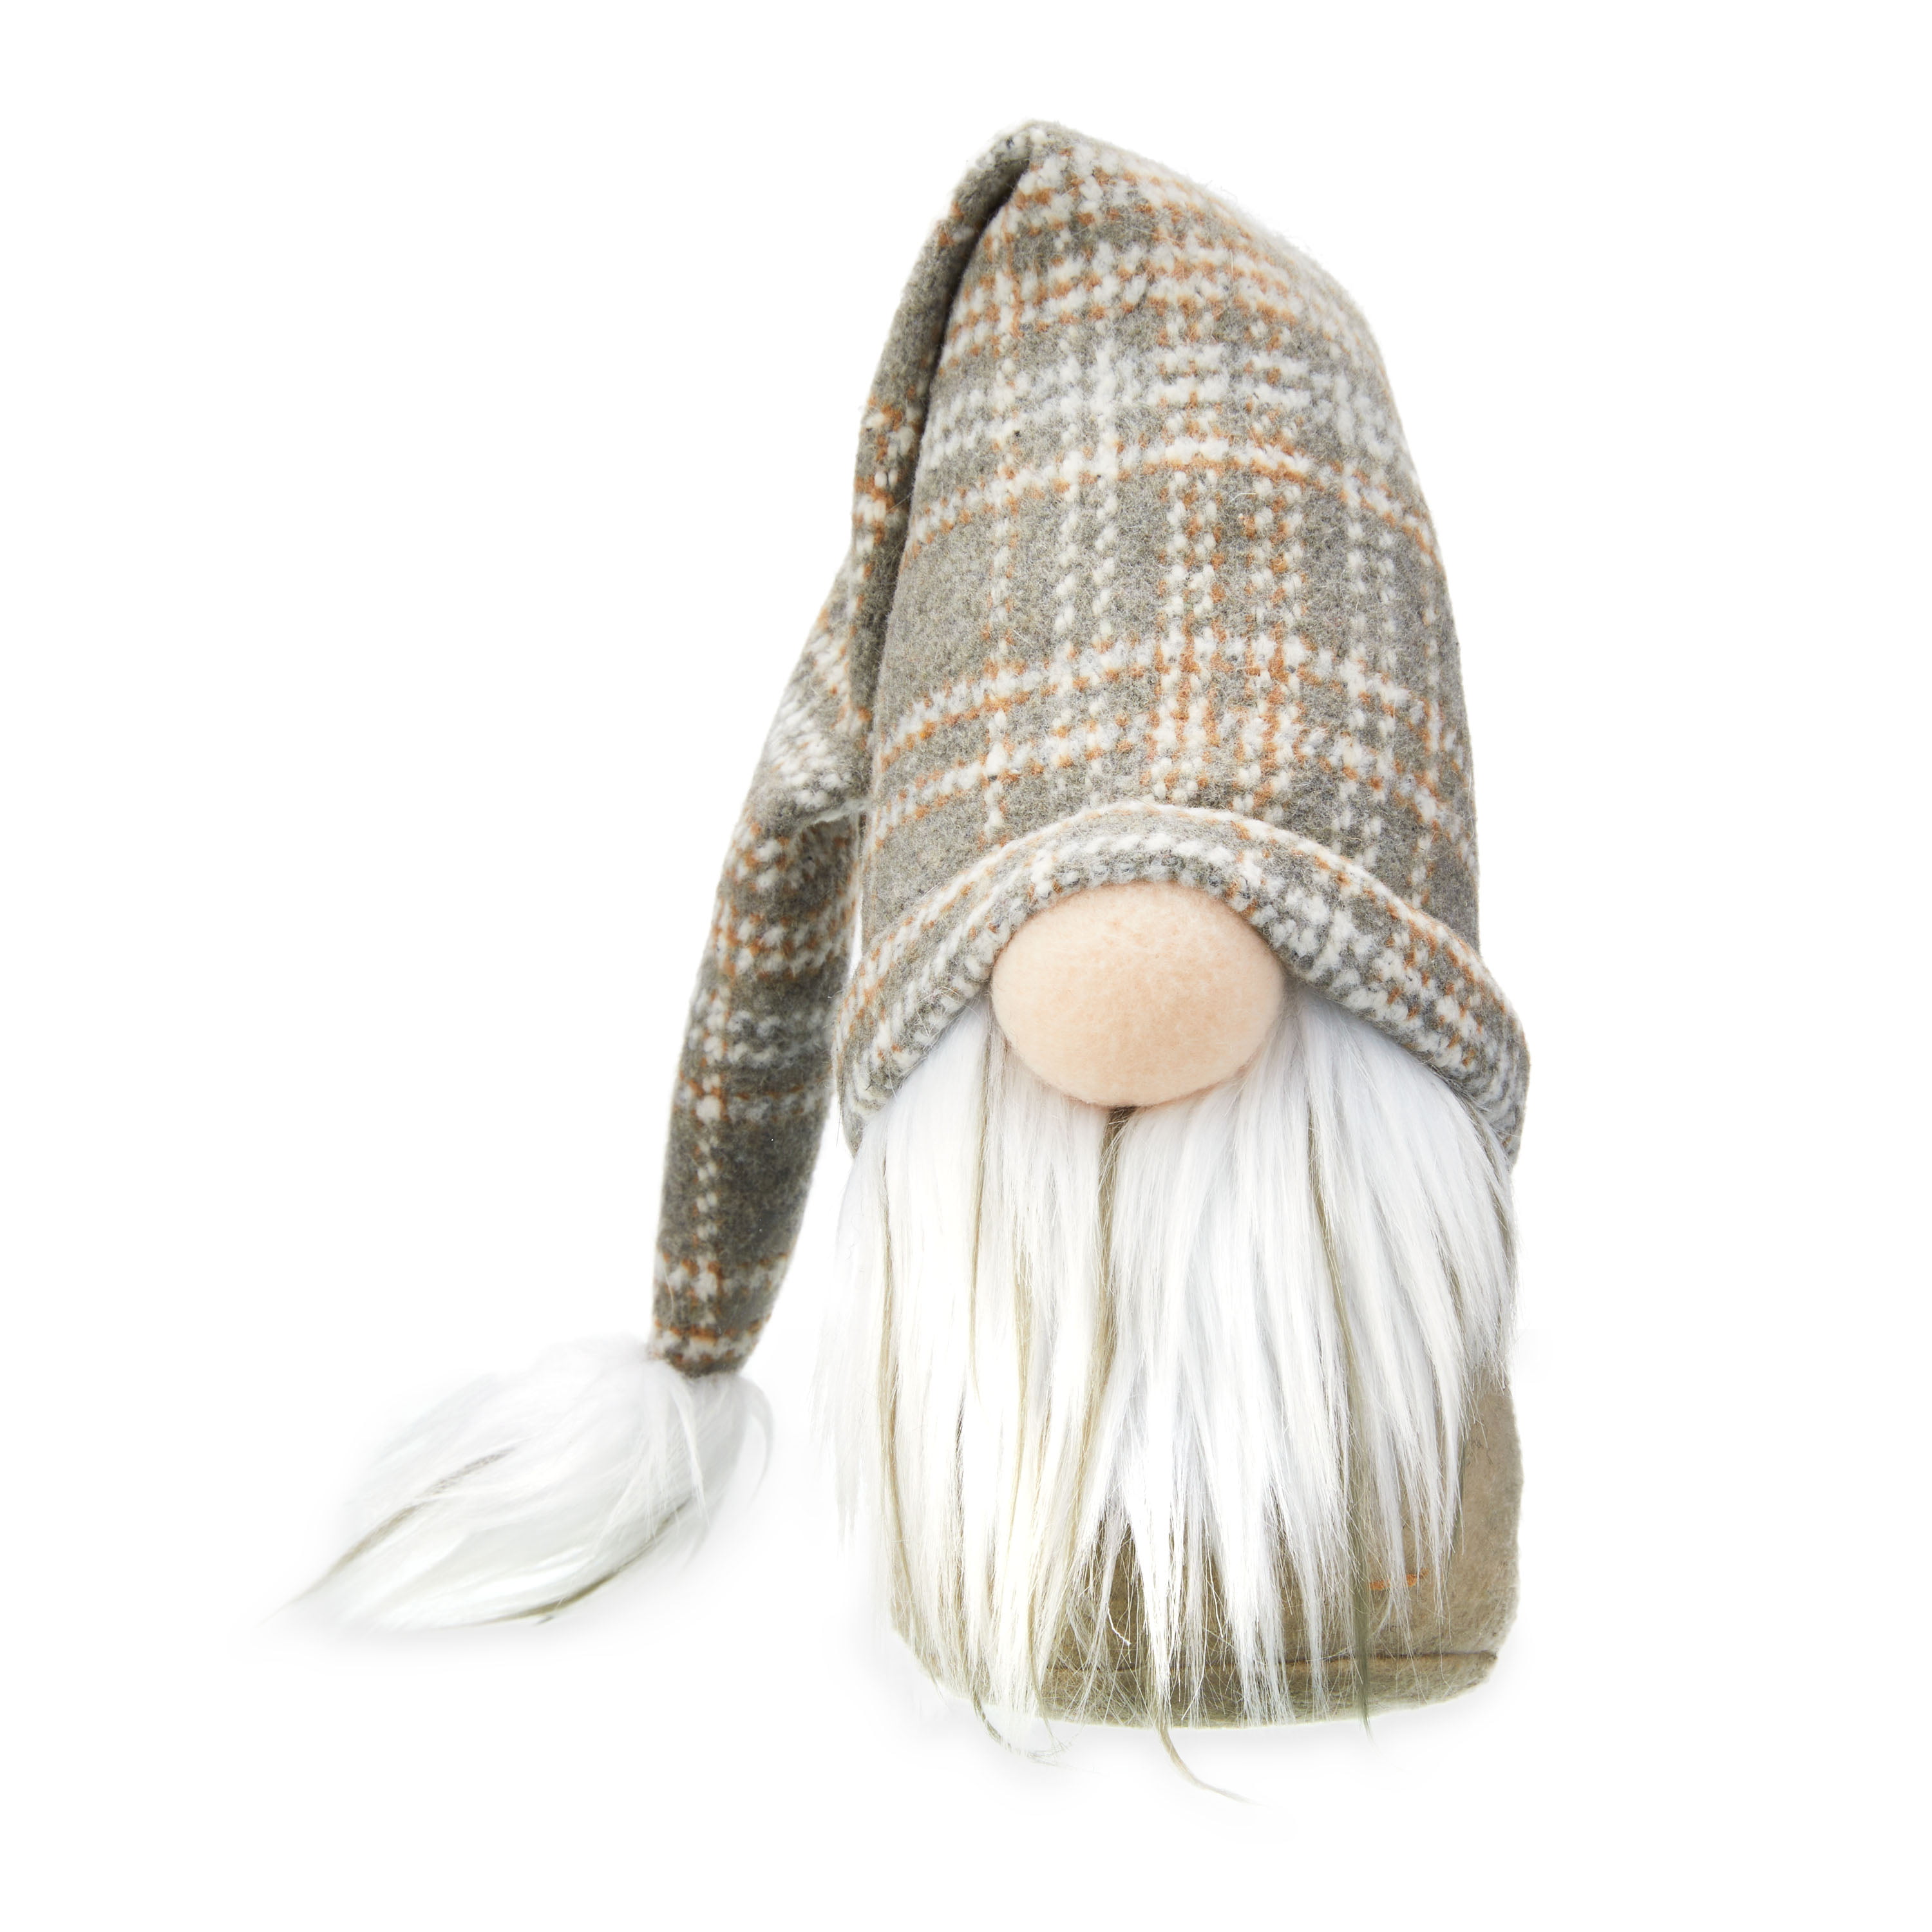 WAY TO CELEBRATE! Way to Celebrate Harvest Gray Plaid Hat Gnome Decoration